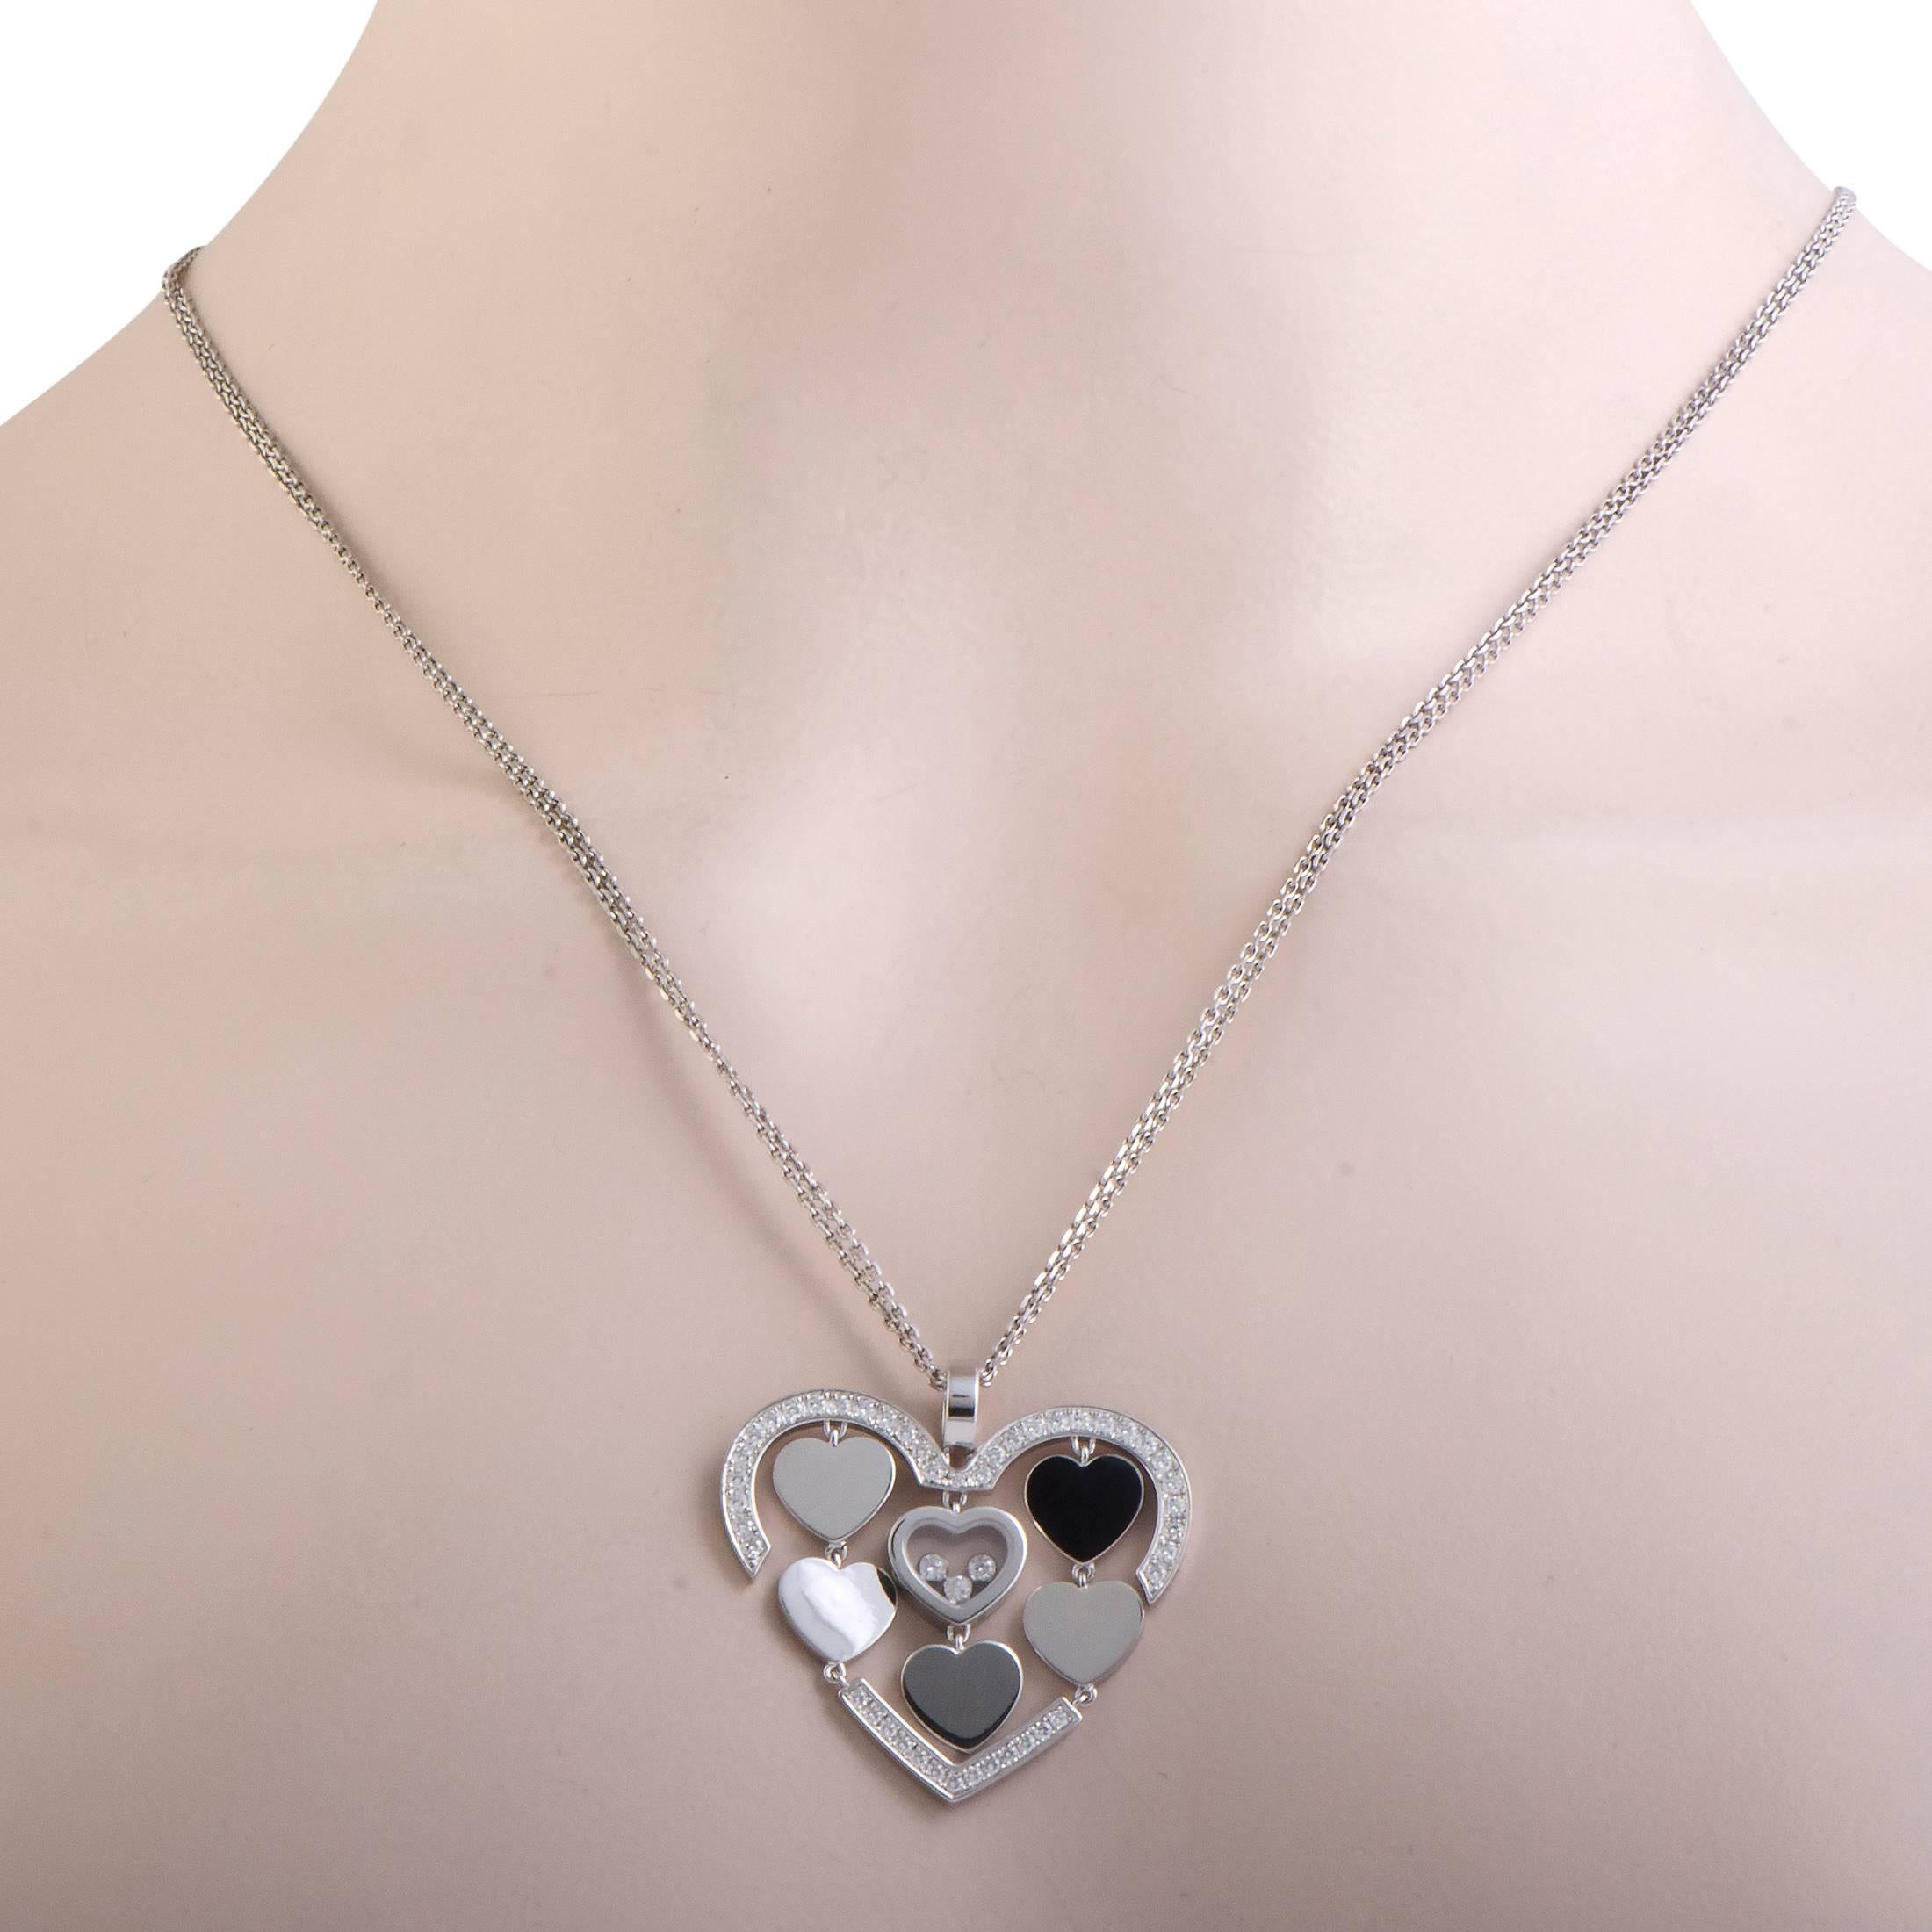 When you see this chic necklace from Chopard, the first thing that catches the eye is its breathtakingly beautiful diamond-set pendant. The heart-shaped pendant has five small hearts in it, one of which has a floating 'happy diamond', and is worn